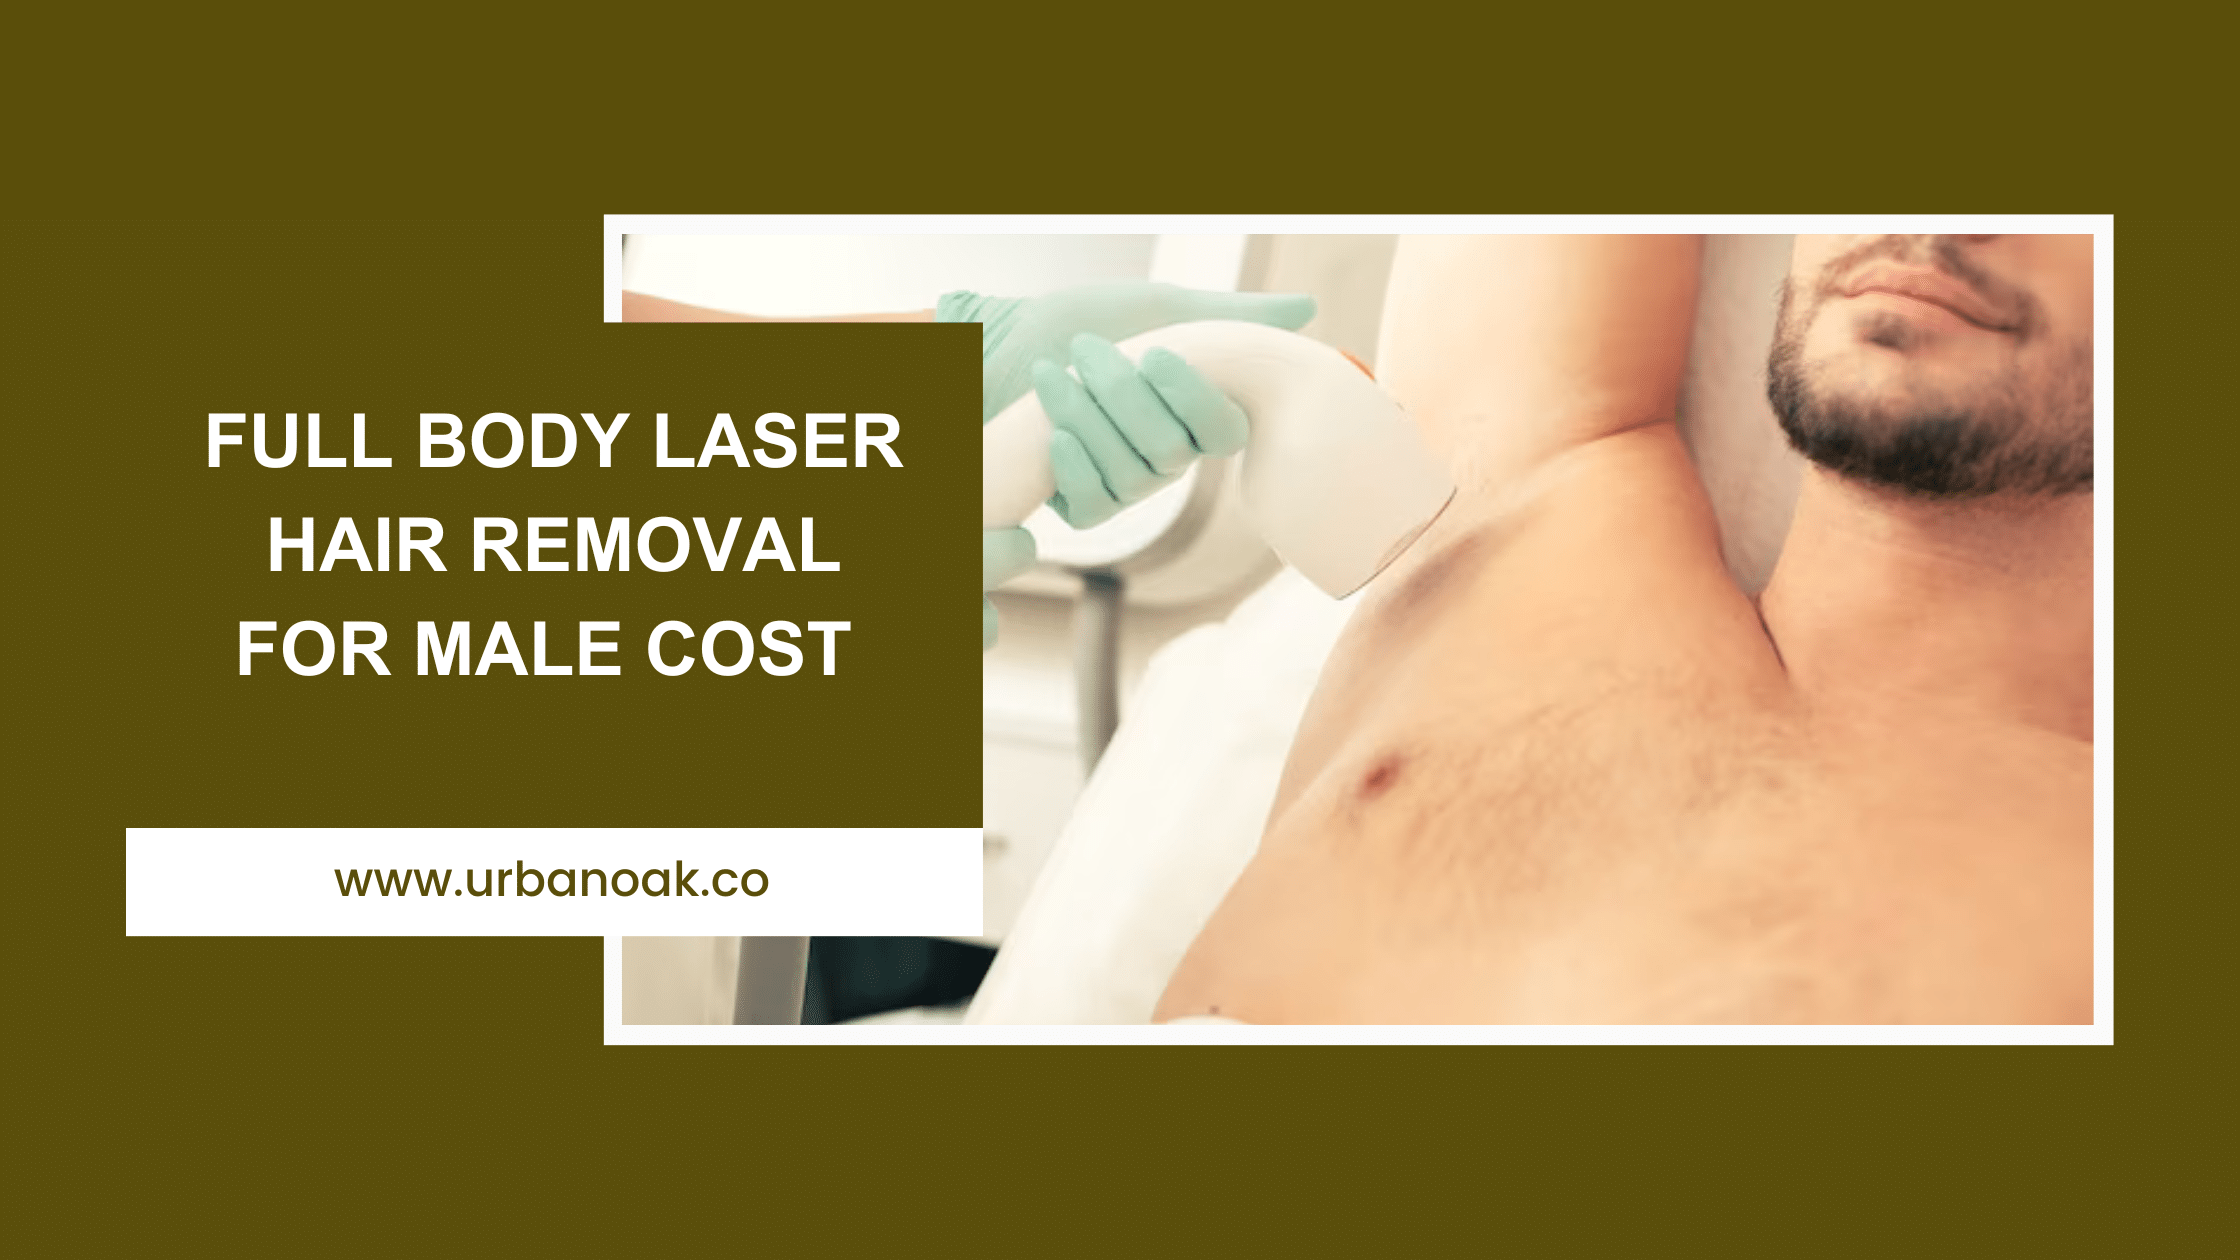 Full body laser hair removal for male cost